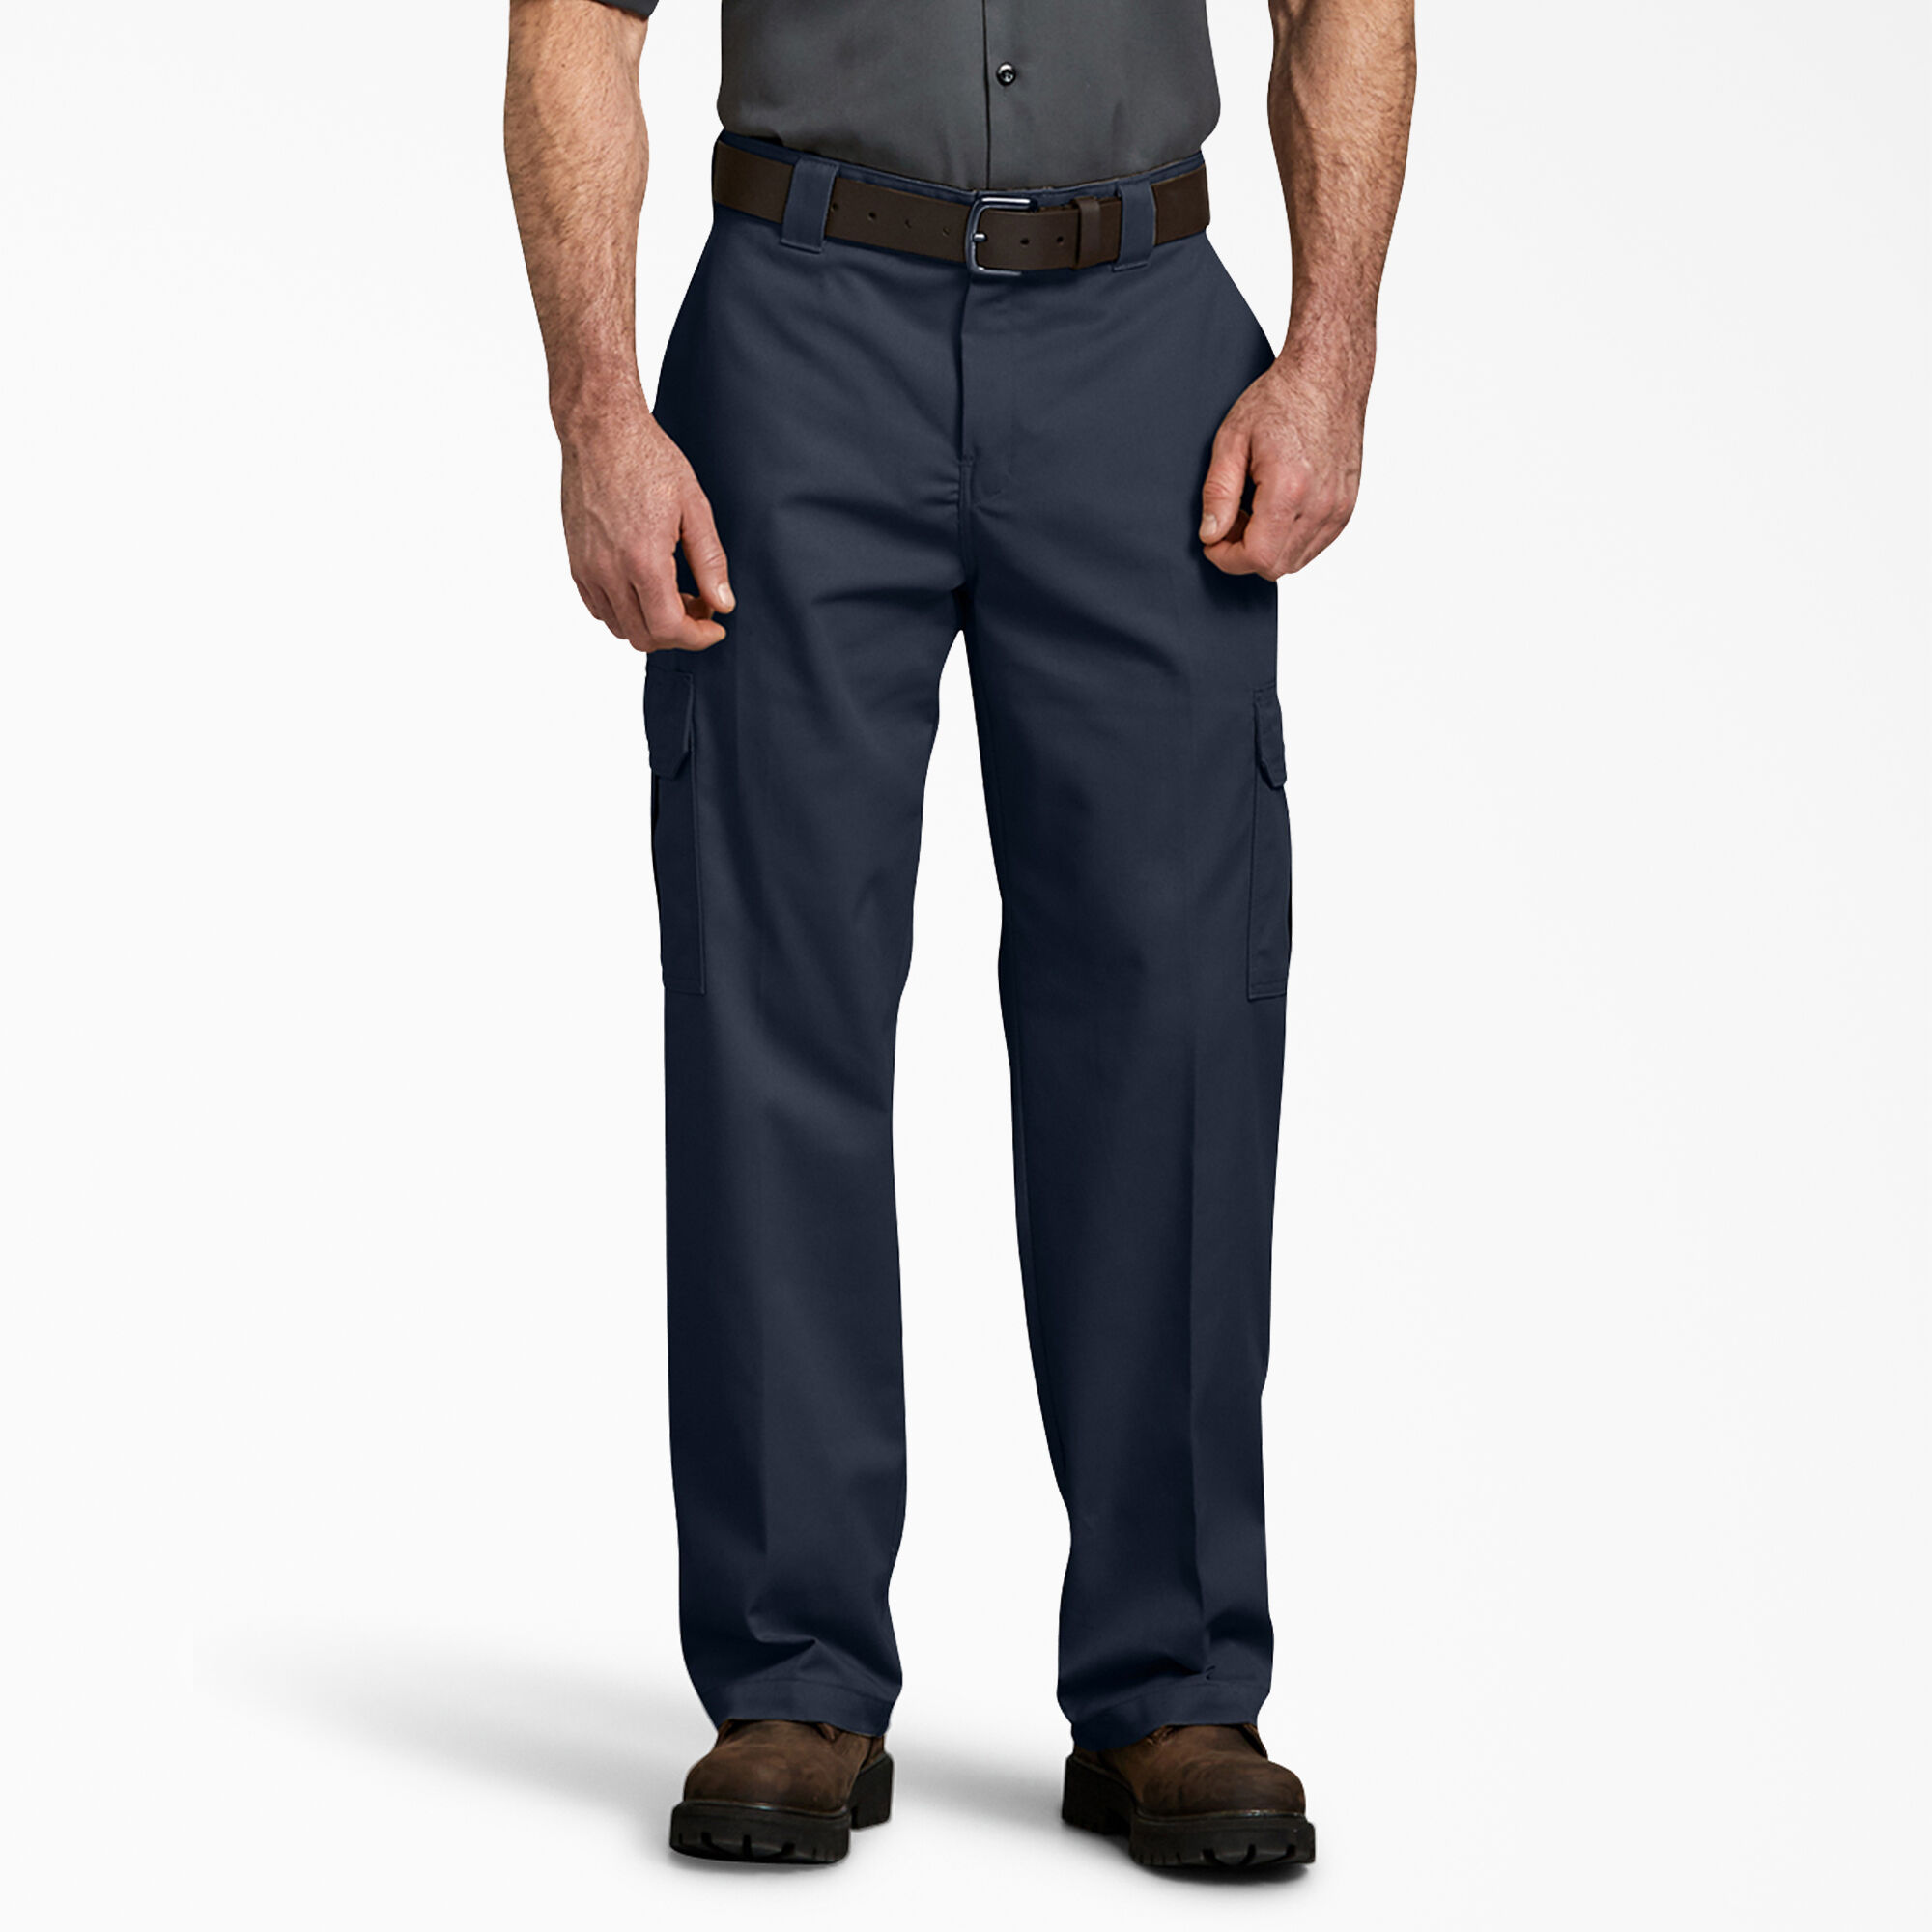 Men's FLEX Relaxed Fit Cargo Pants - Dickies US